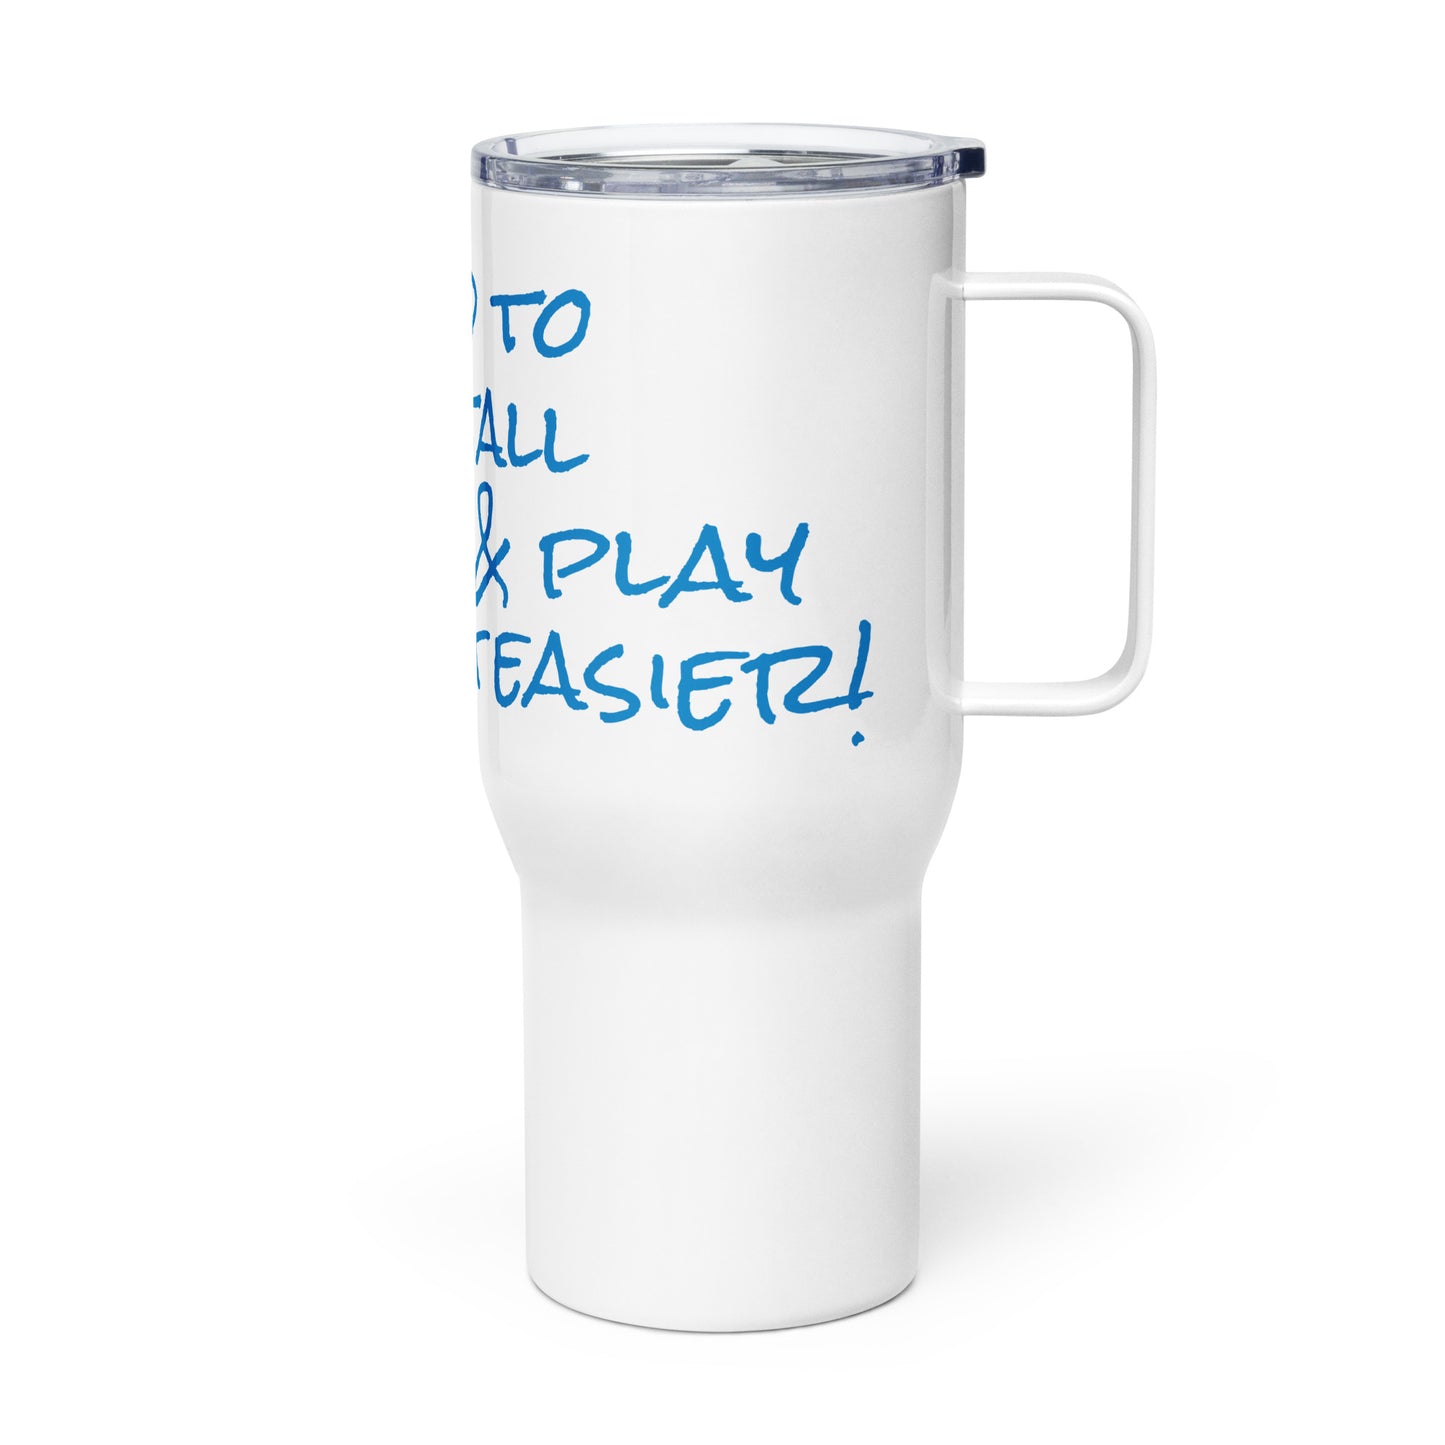 I need to uninstall adulting & play something easier (blue) - Travel mug with a handle